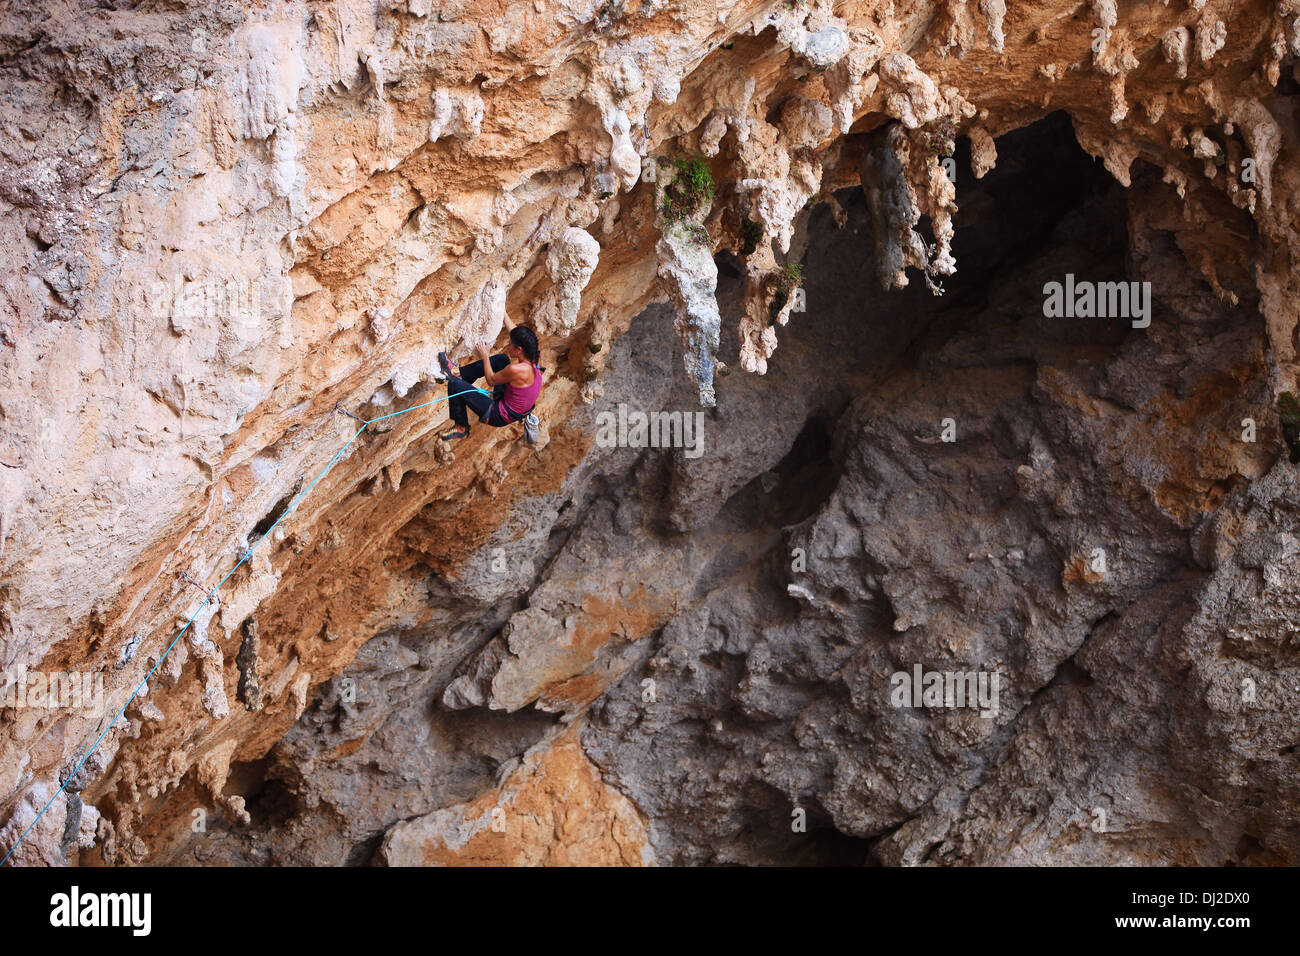 Female rock climber on a cliff face Stock Photo